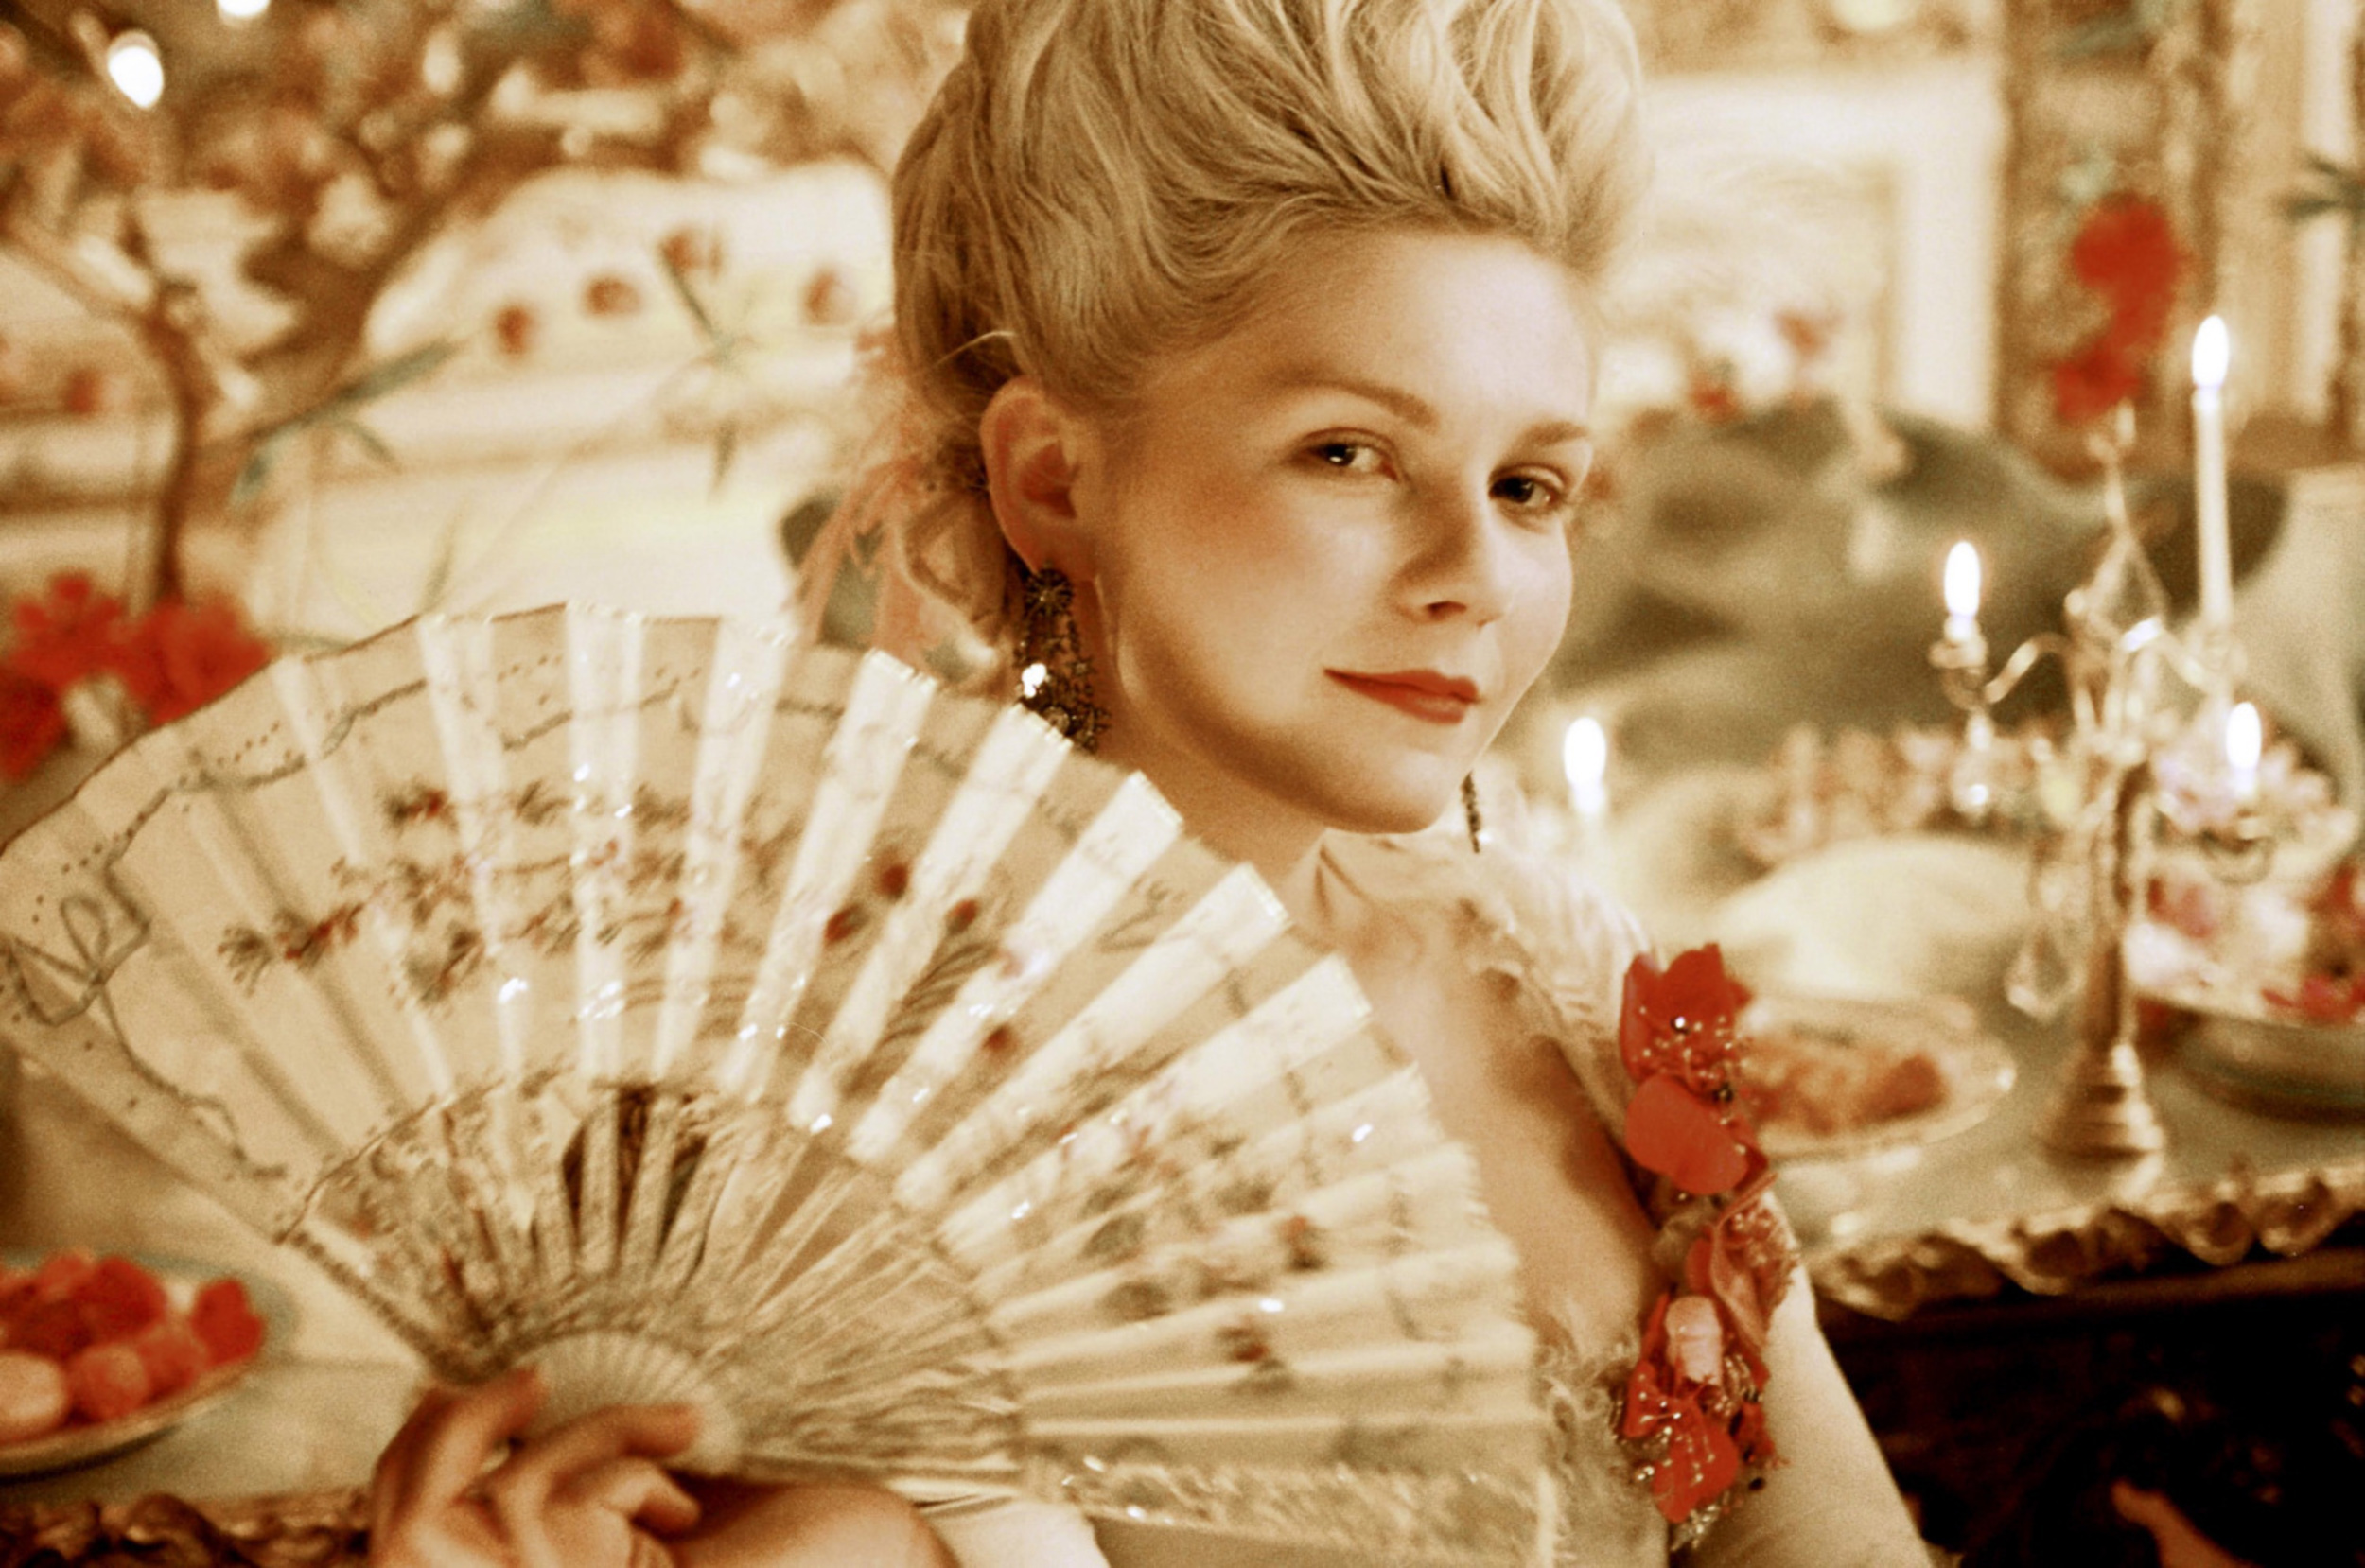 <p>Talk about a polarizing movie. People seem to either love Sofia Coppola’s take on Marie Antoinette or despise it. She used pop music and all manner of anachronisms in her film about France’s controversial queen. You have to at least credit Coppola for not taking a run-of-the-mill approach to the material.</p><p><a href='https://www.msn.com/en-us/community/channel/vid-cj9pqbr0vn9in2b6ddcd8sfgpfq6x6utp44fssrv6mc2gtybw0us'>Follow us on MSN to see more of our exclusive entertainment content.</a></p>